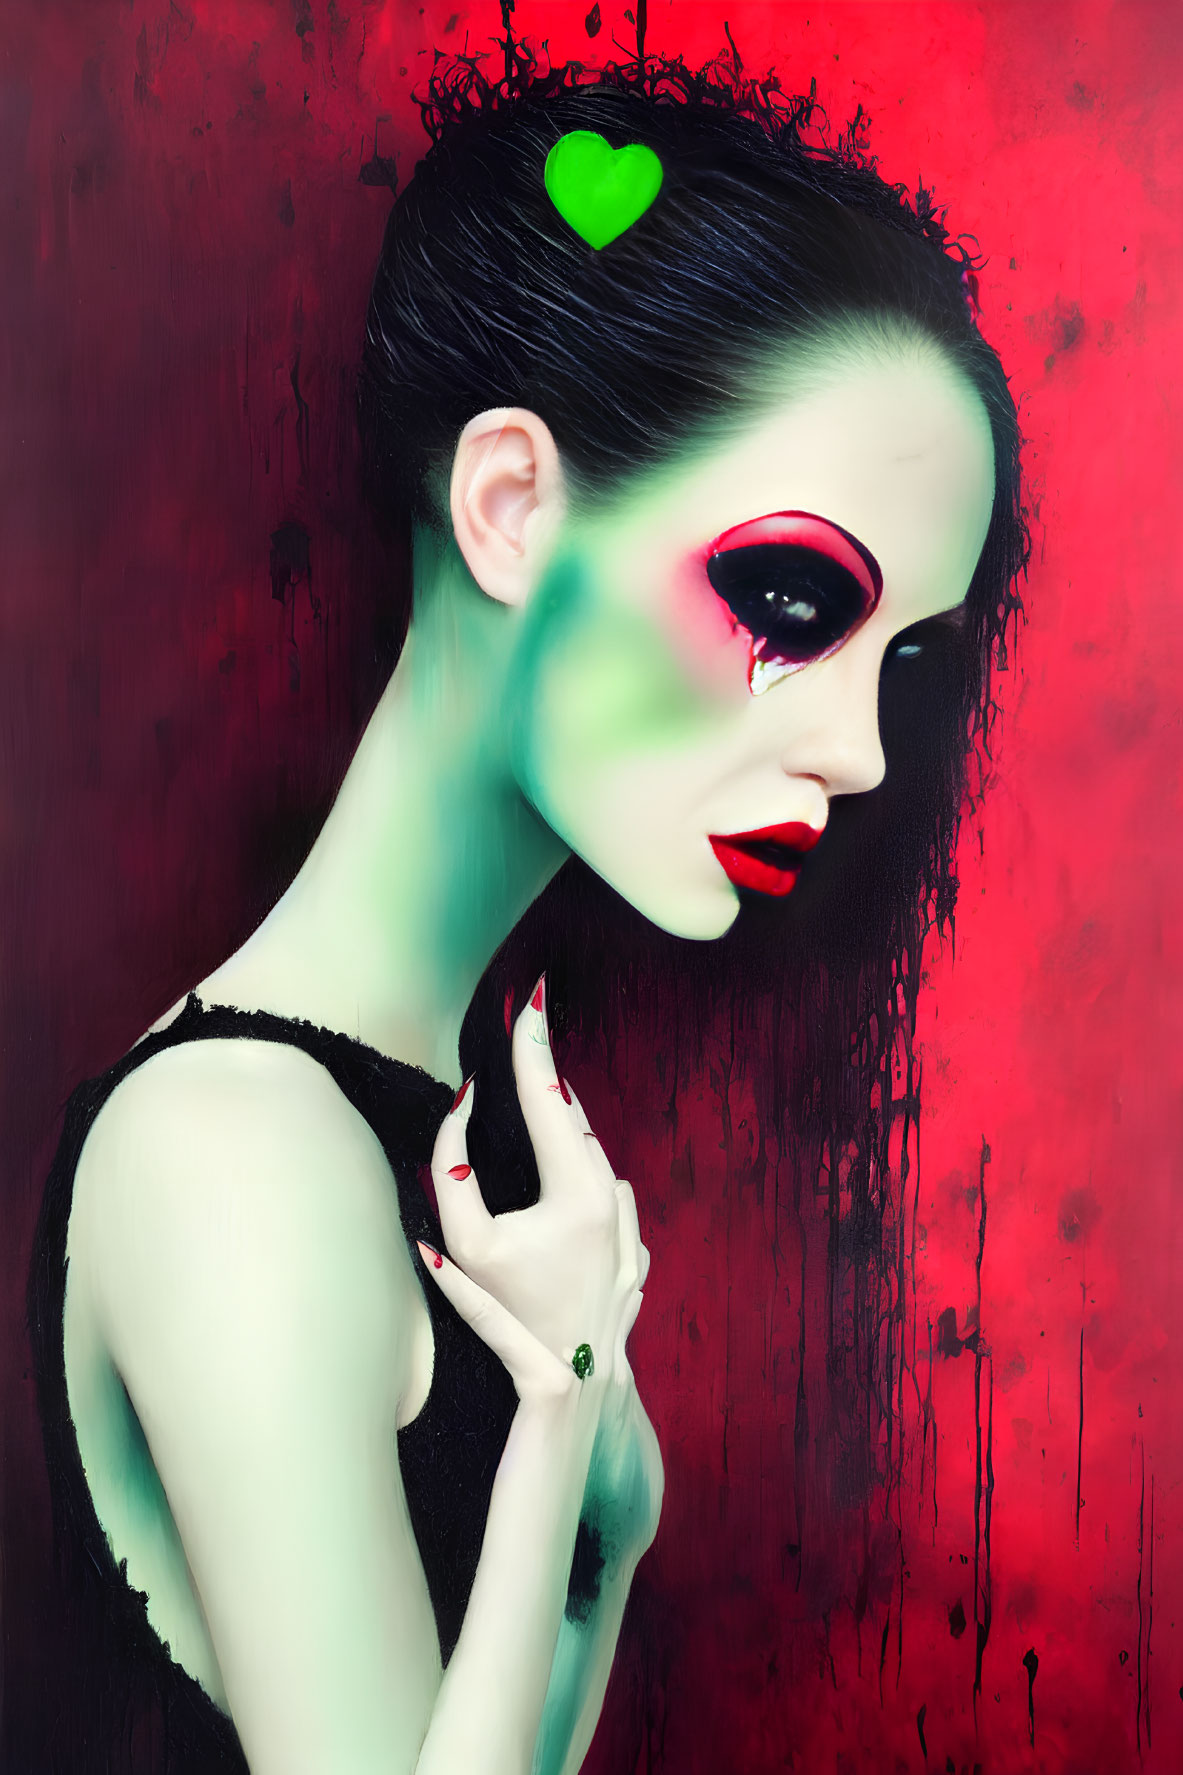 Person with green and red makeup, heart on forehead, tear on red backdrop